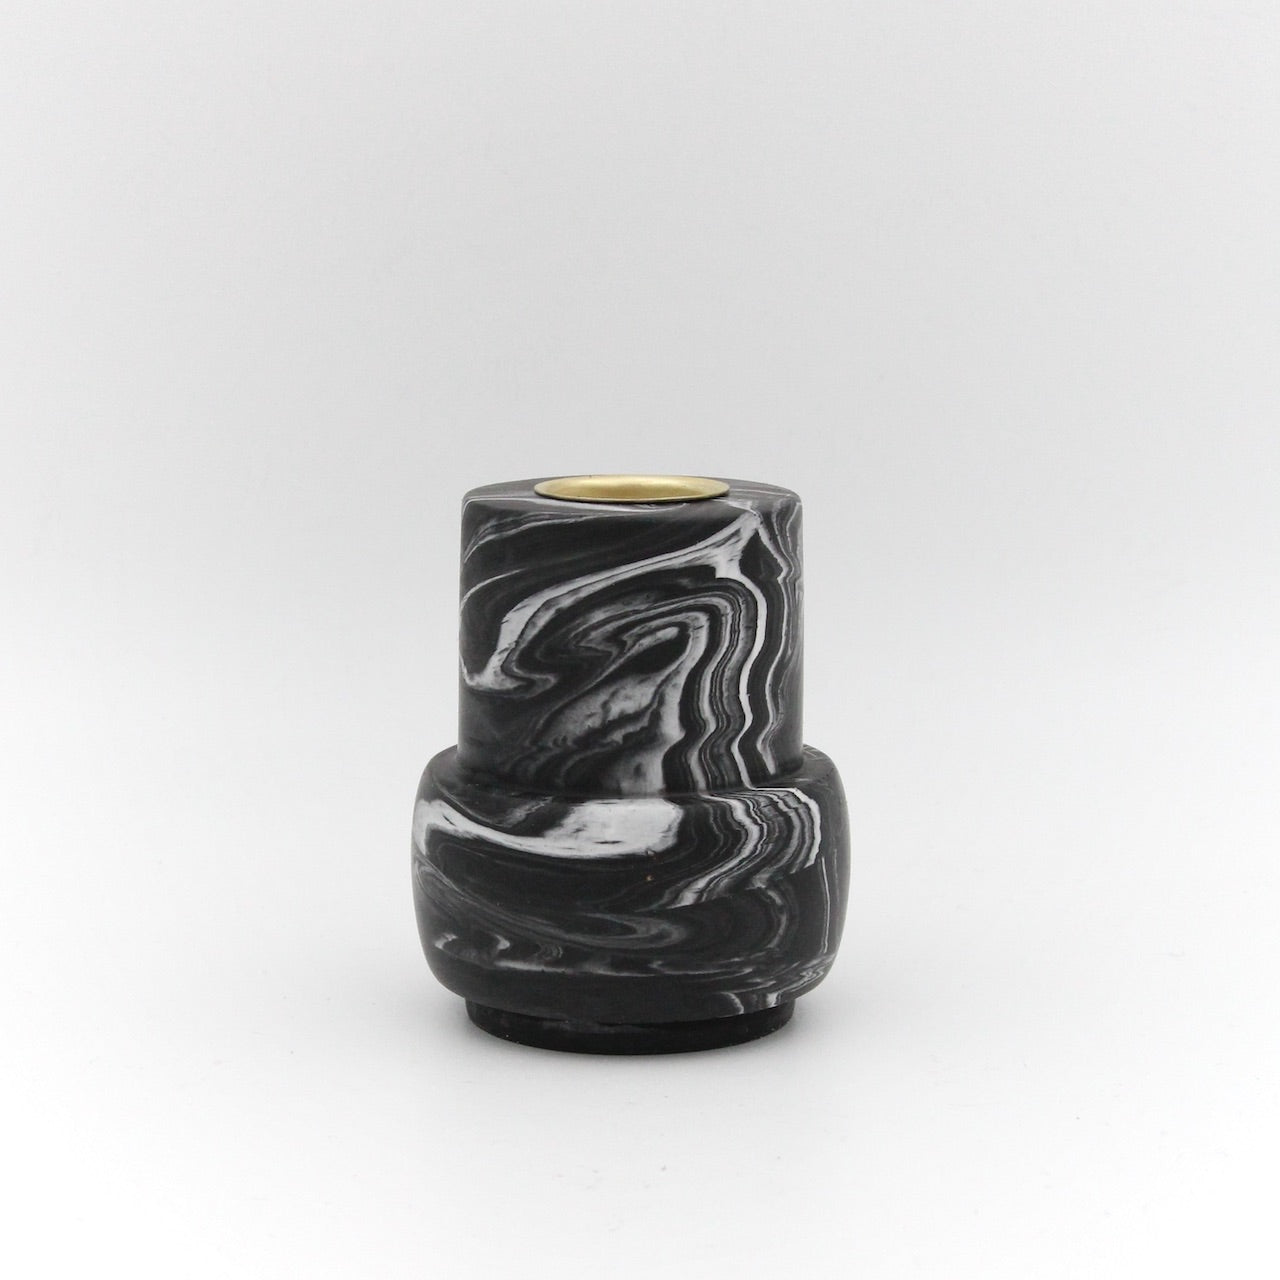 Molly stand - Black with white marble